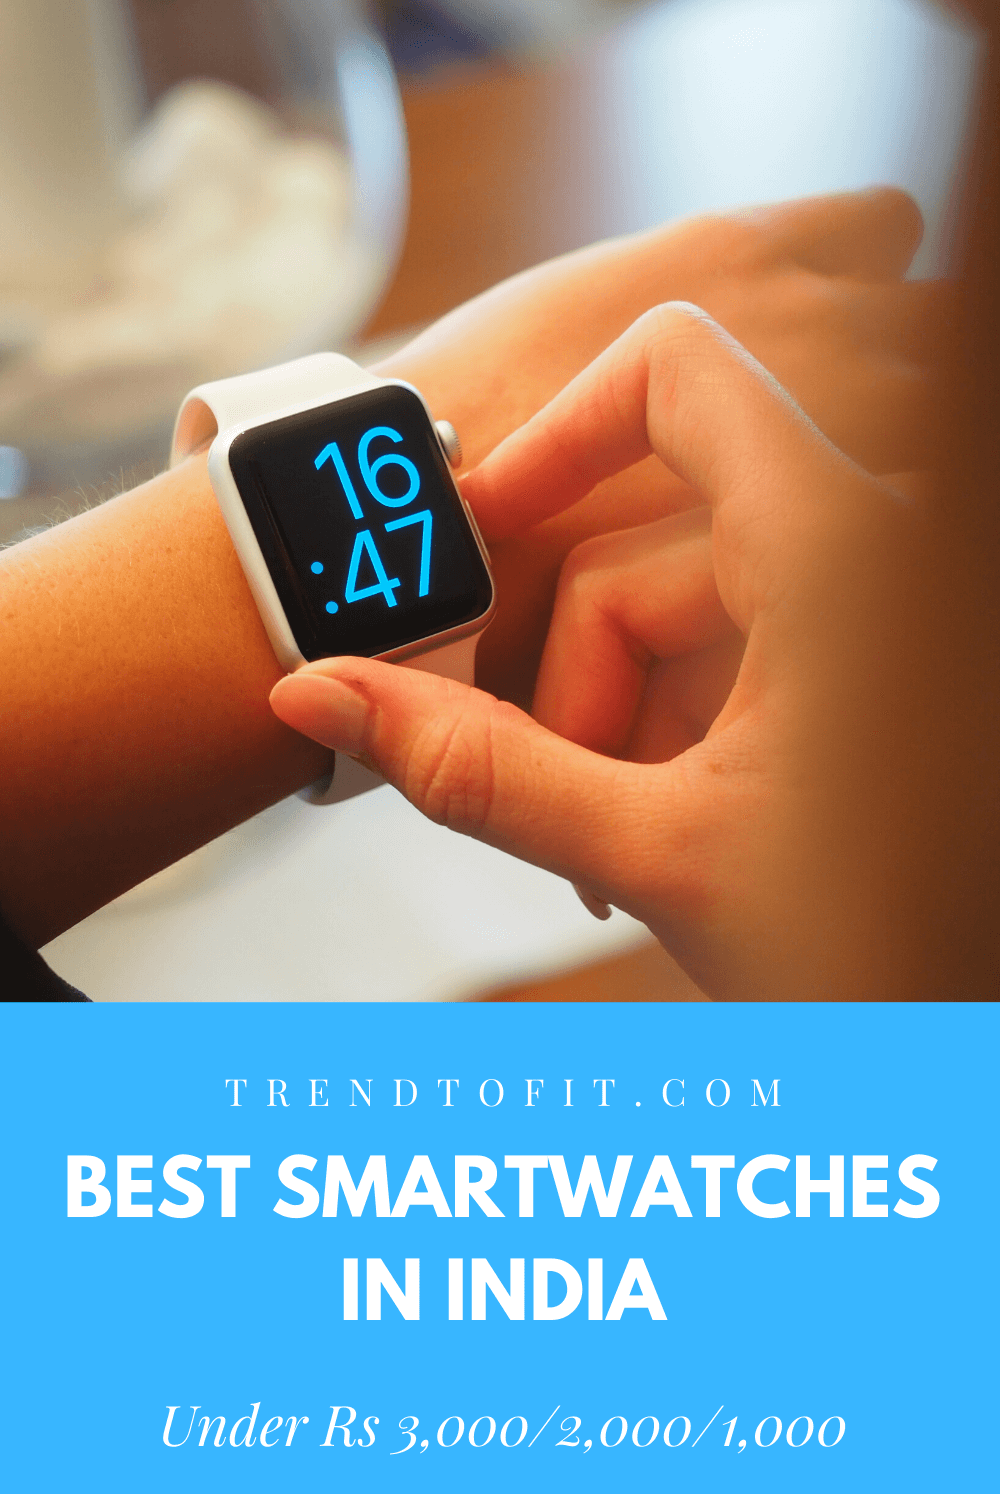 cheap and best smartwatches India under 2000